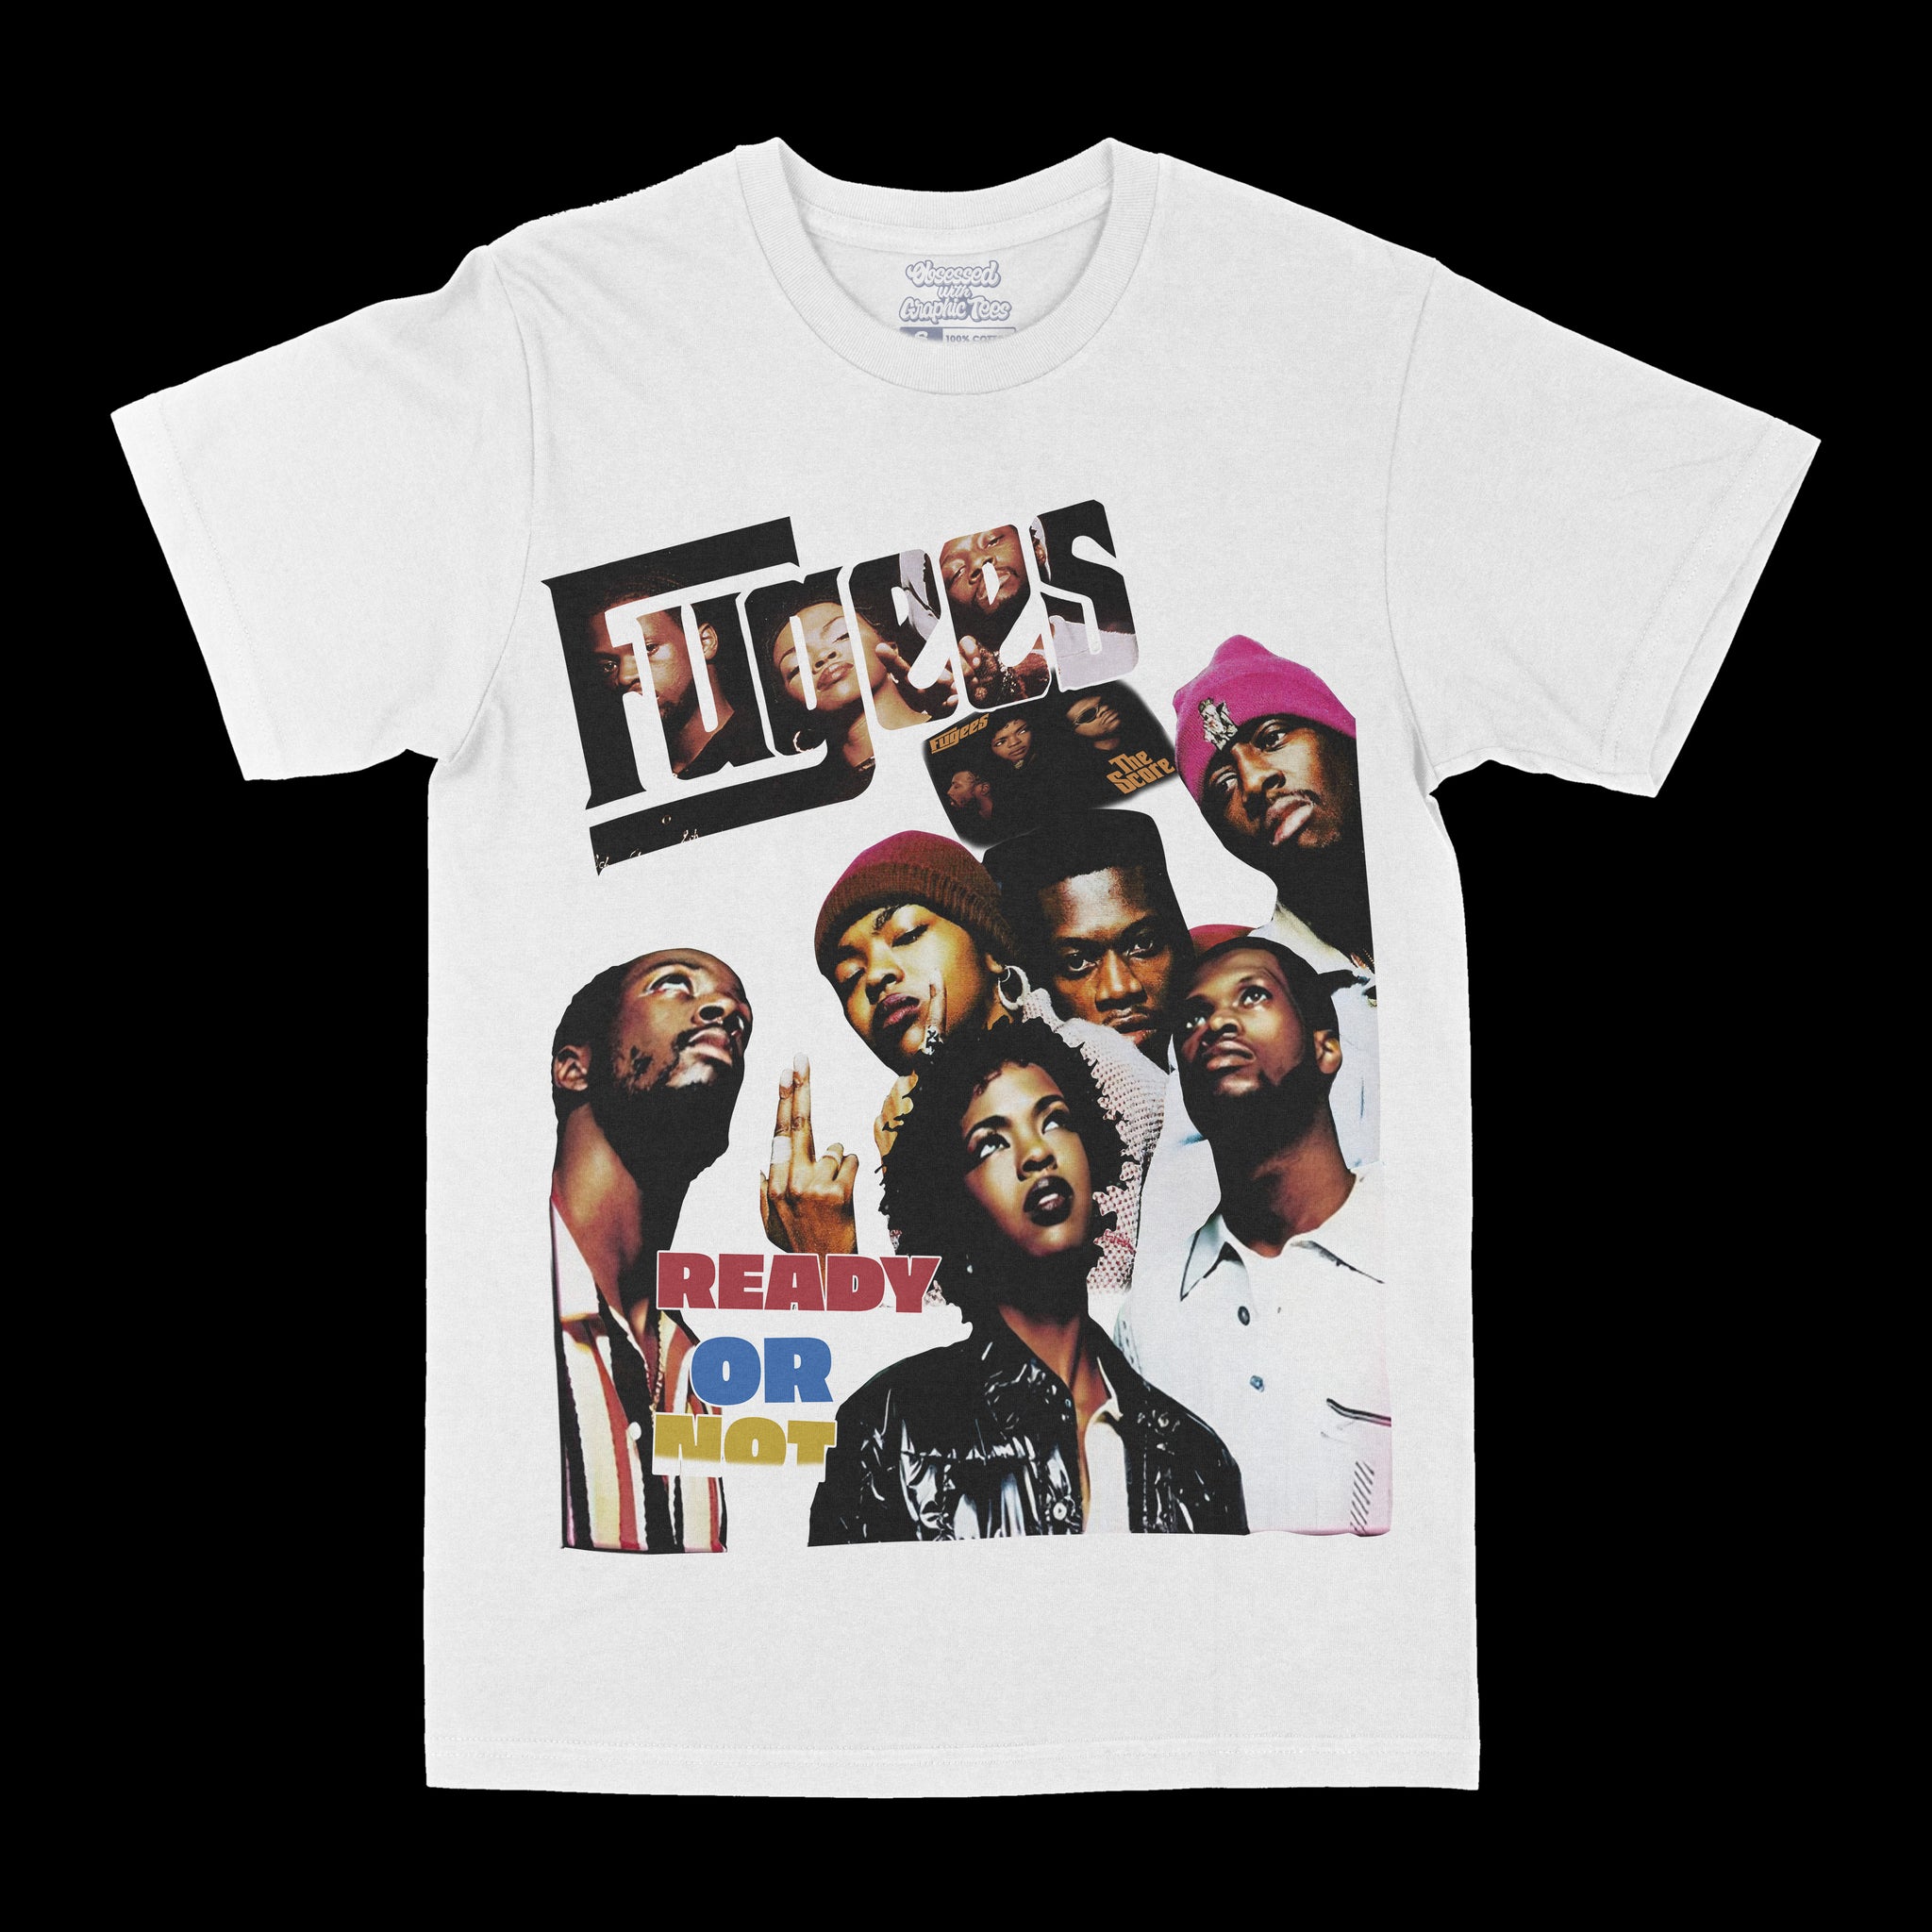 Fugees "Ready or Not" Graphic Tee